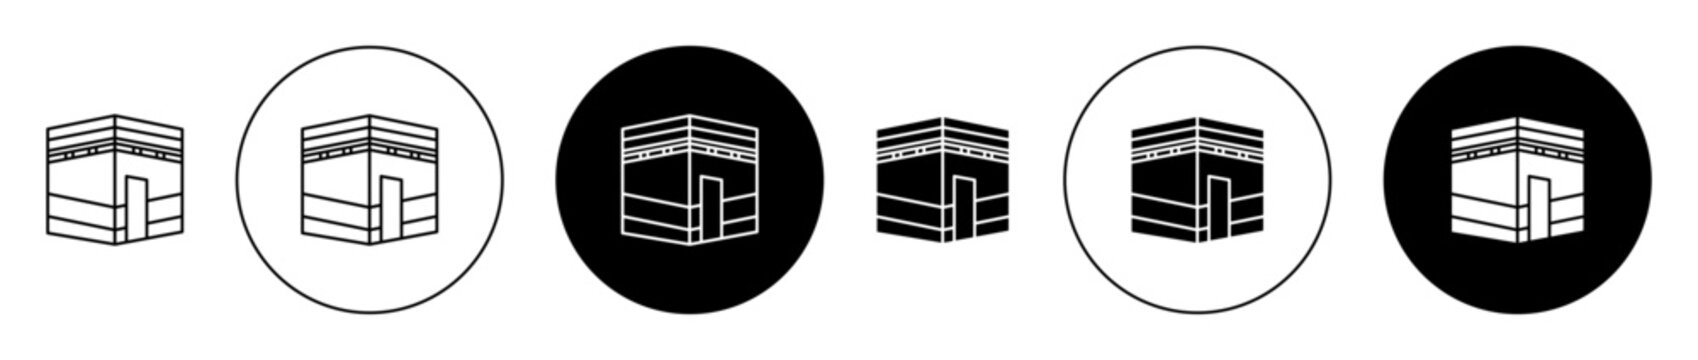 Kaaba icon set. mecca or haj vector symbol. pilgrimage makka sign in black filled and outlined style.